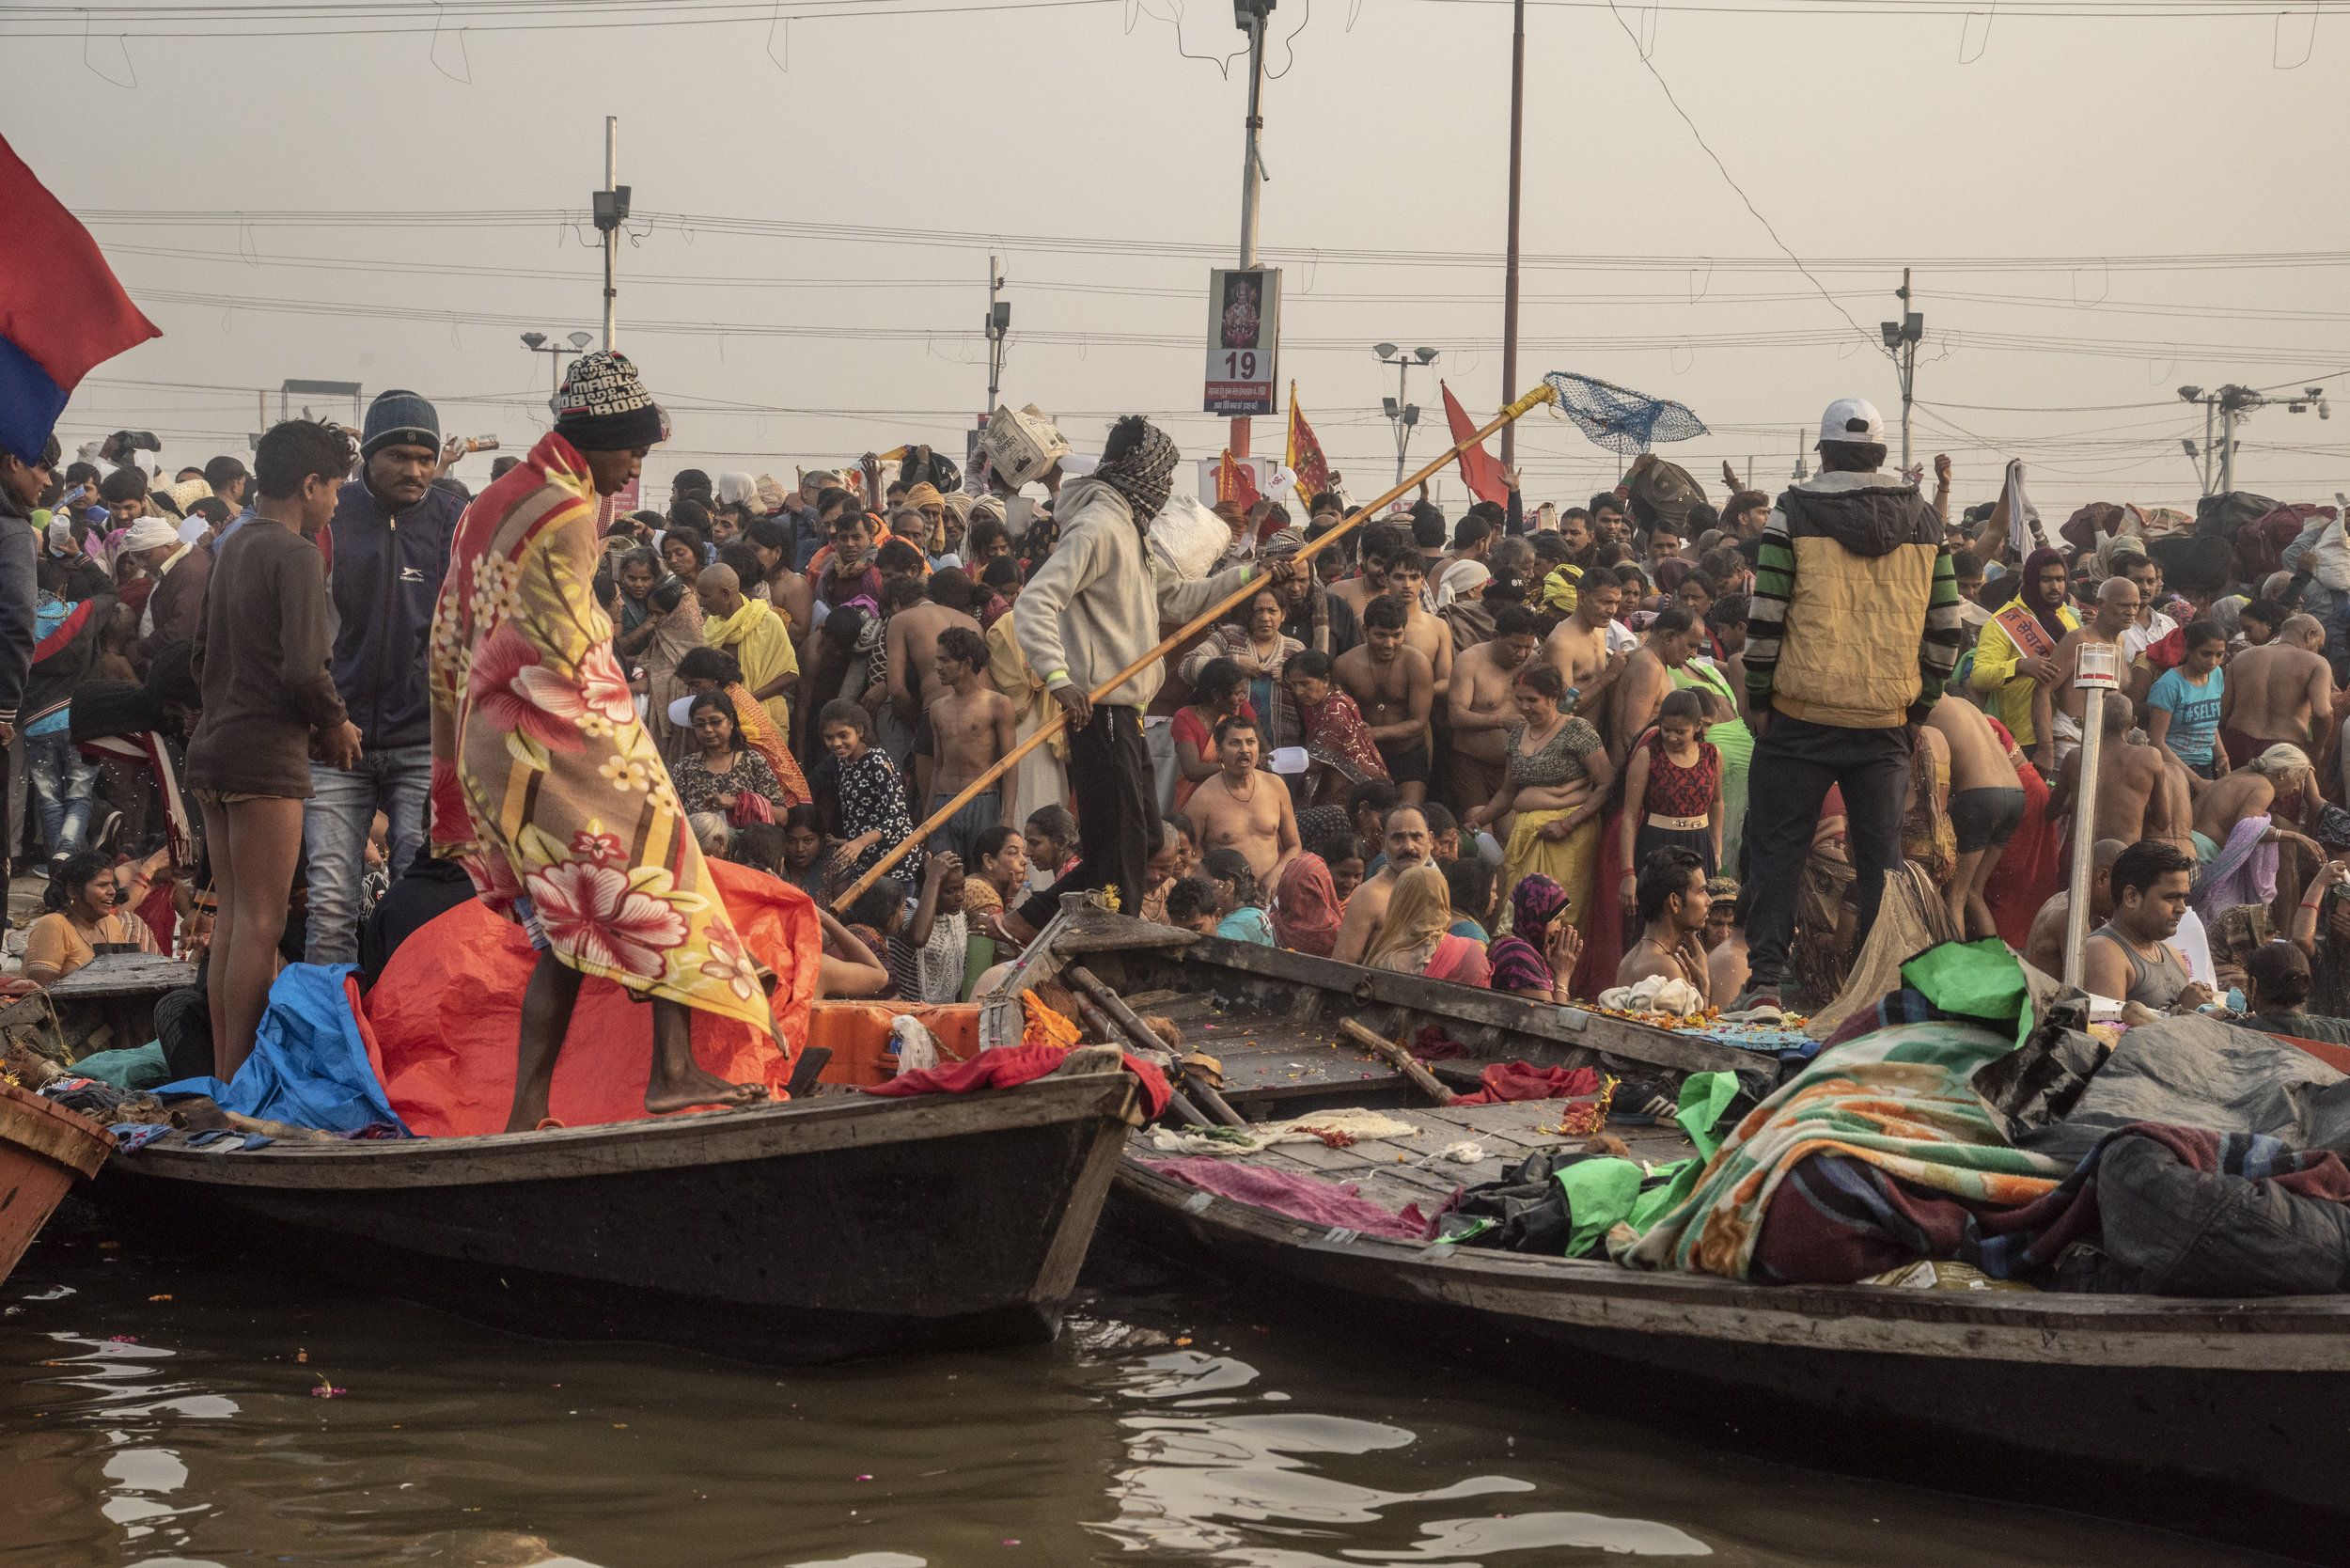  Boats line the shore as a mass of people gather to bathe in the ganges 